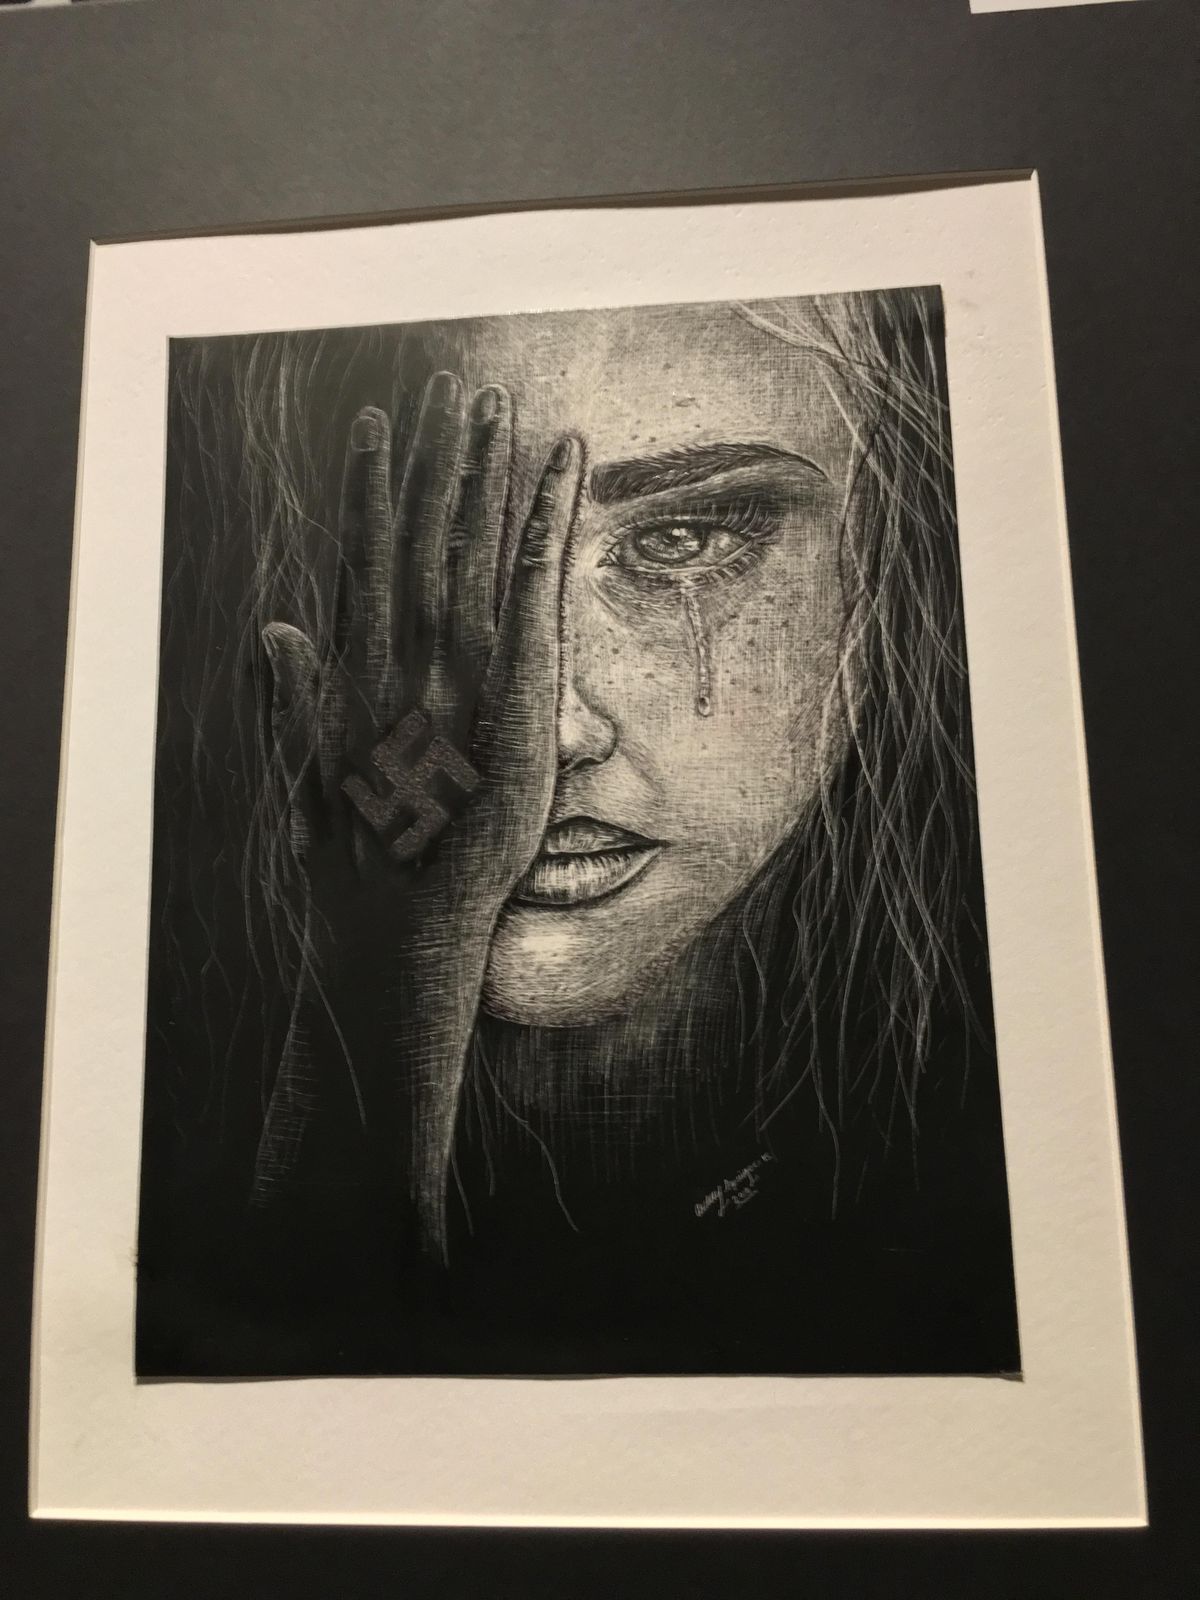 This piece by Aubrey Springer of Mead High School earned third place in the high school art portion of the Spokane Community Observance of the Holocaust 2018 Art and Essay Contests. Springer based the piece on a Gandhi quote, “Be the Change You Wish to See.” (Courtesy photo)